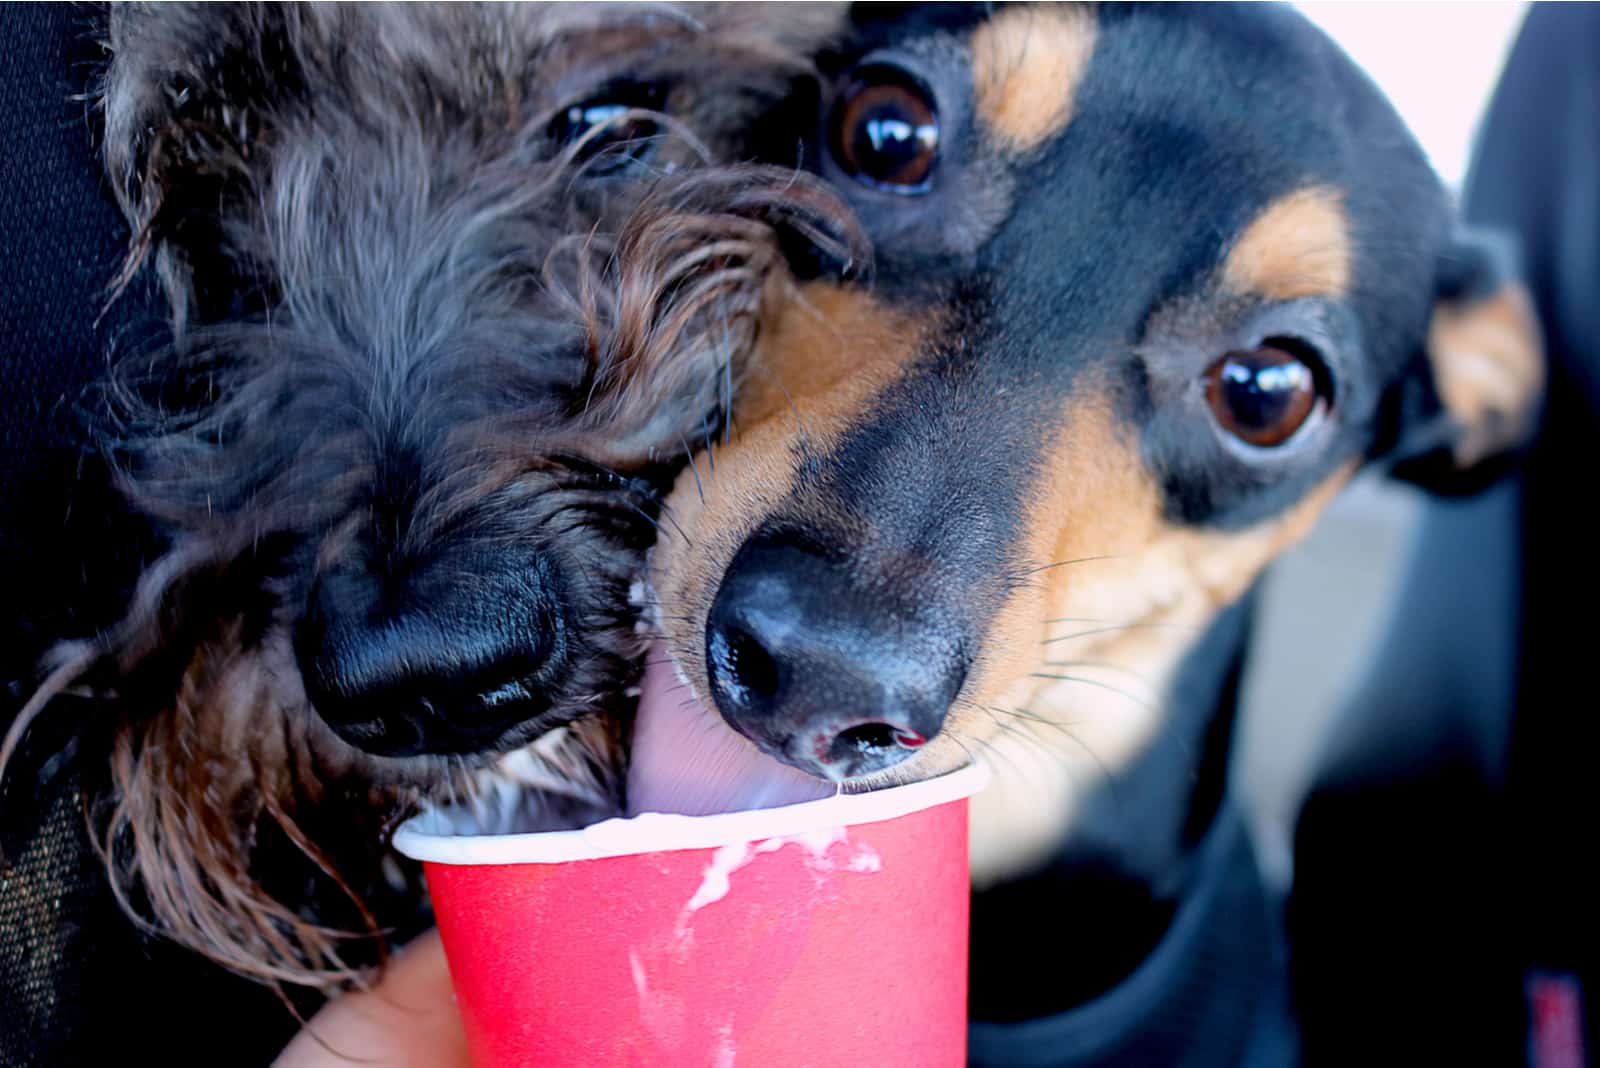 Schnauzer and Jack Russel Terrier Licking Whipped Cream out of a Red Cup